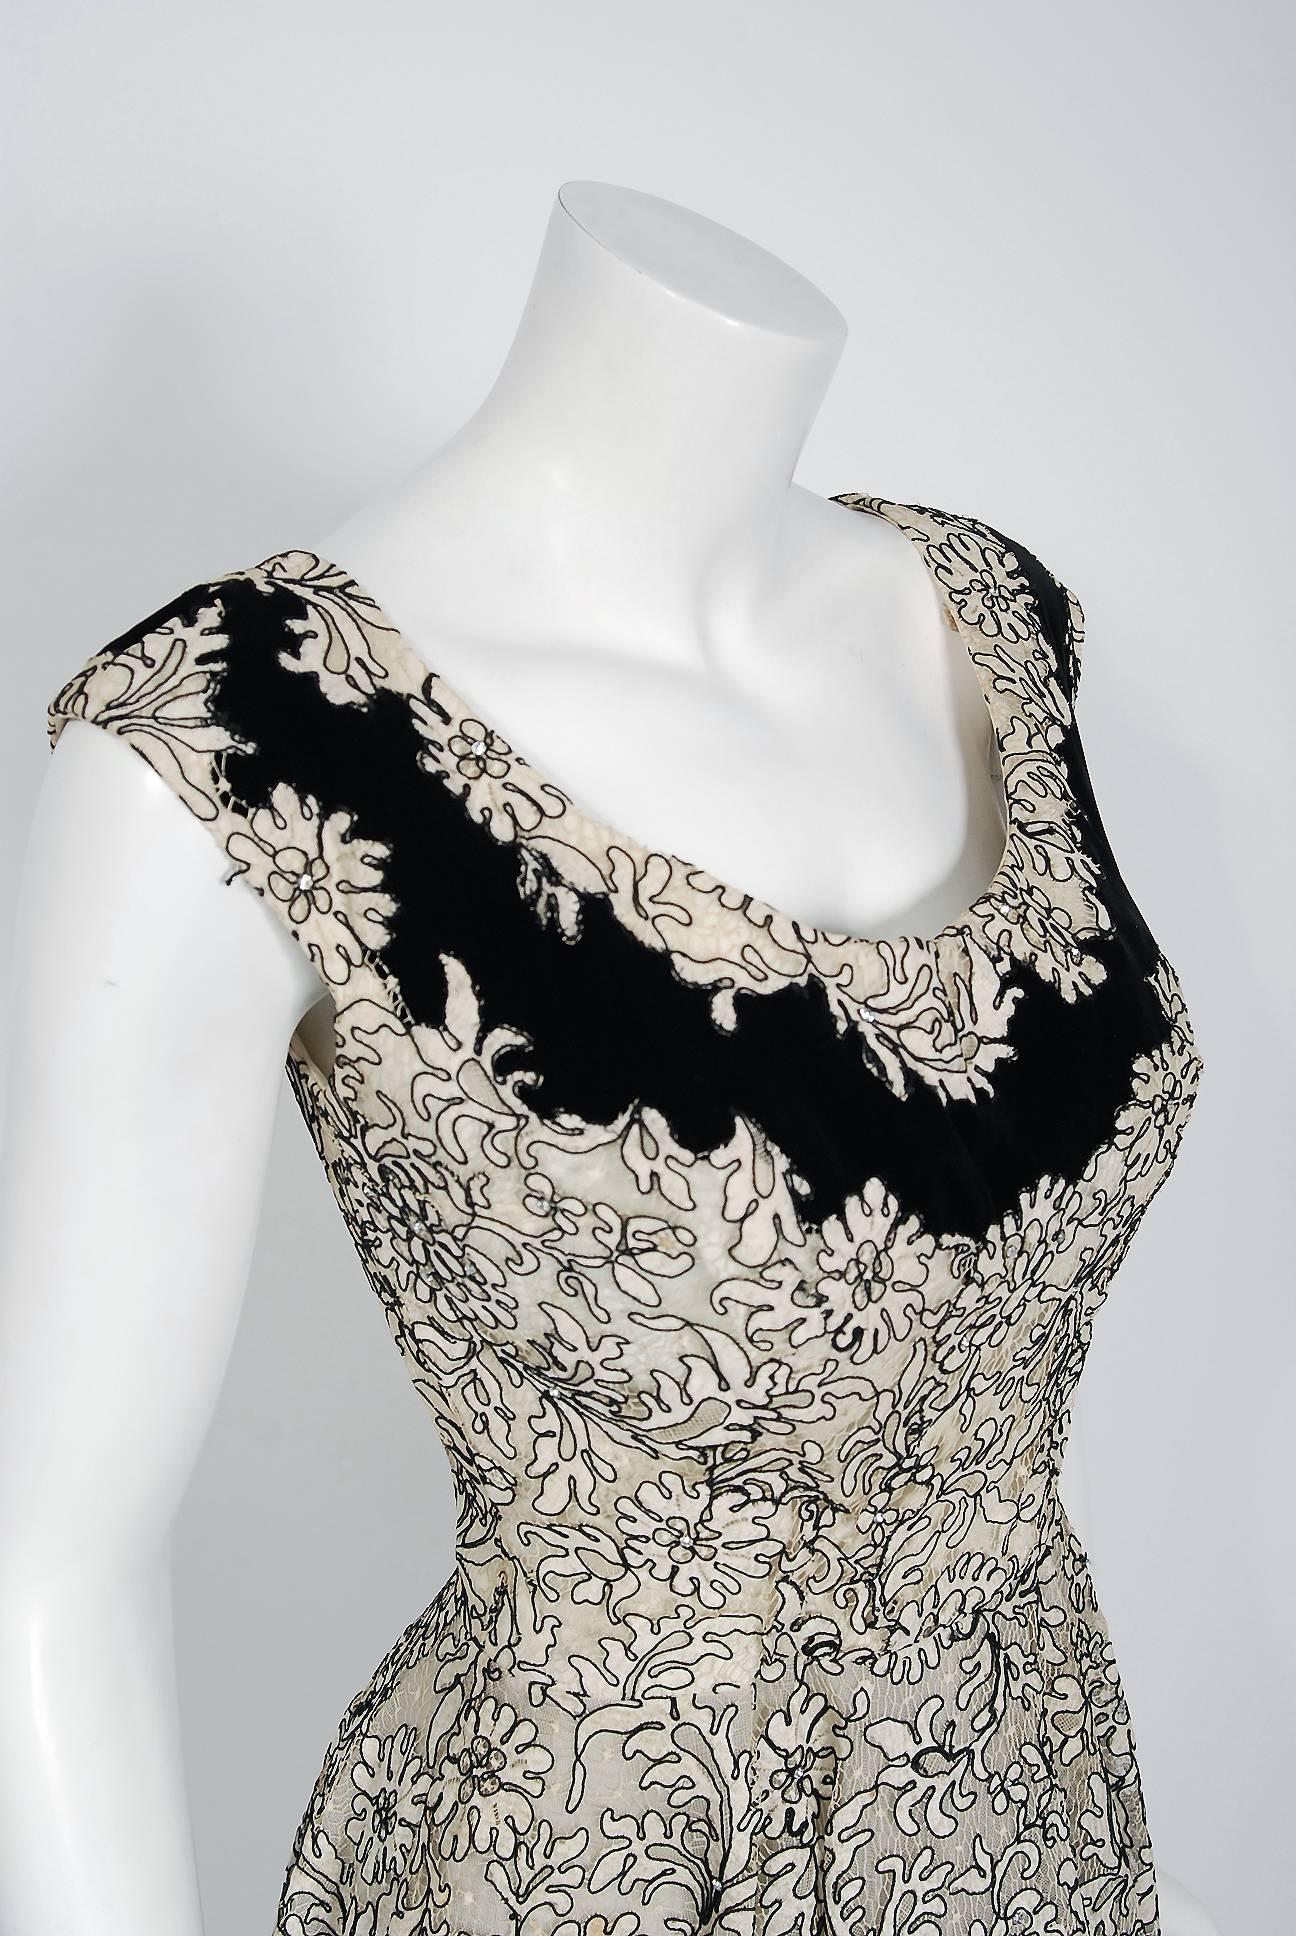 Breathtaking ivory and black corded illusion floral lace party dress created by Italian designer Fernando Sarmi when he was head designer for Elizabeth Arden in the 1950's. Sarmi developed a wonderful reputation as a top designer, wooing an